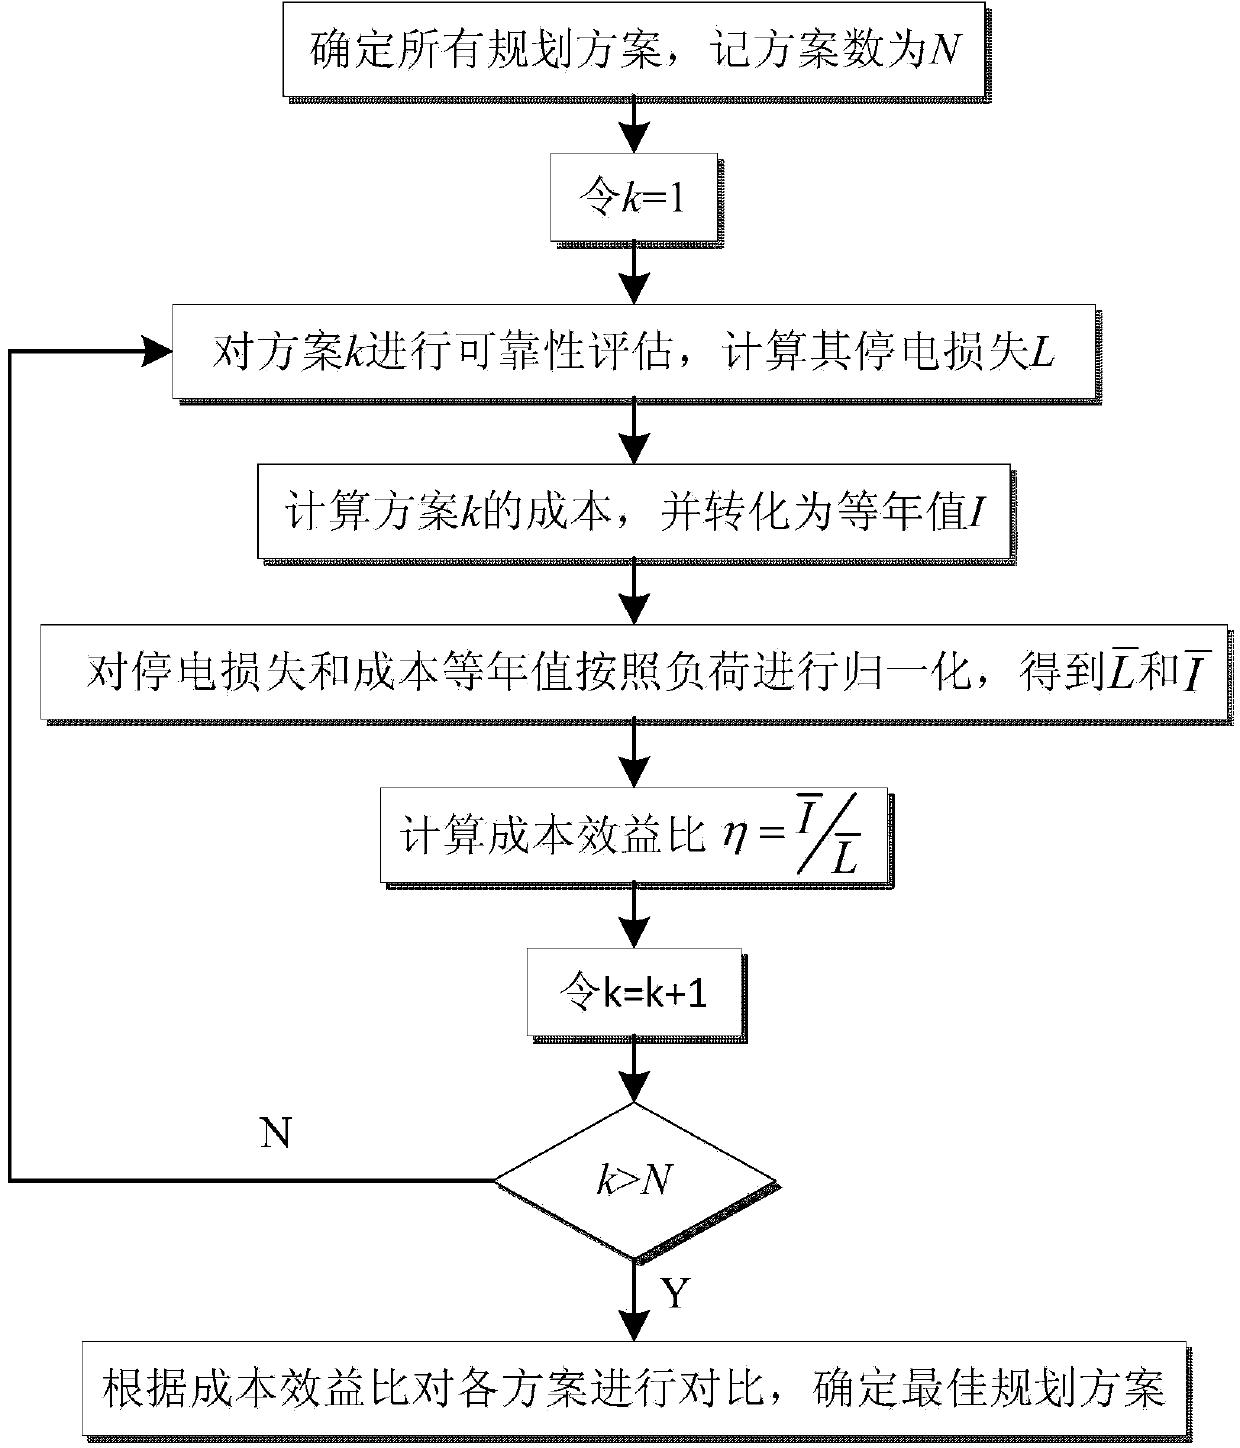 Marginal cost theory-based power distribution network structure planning method